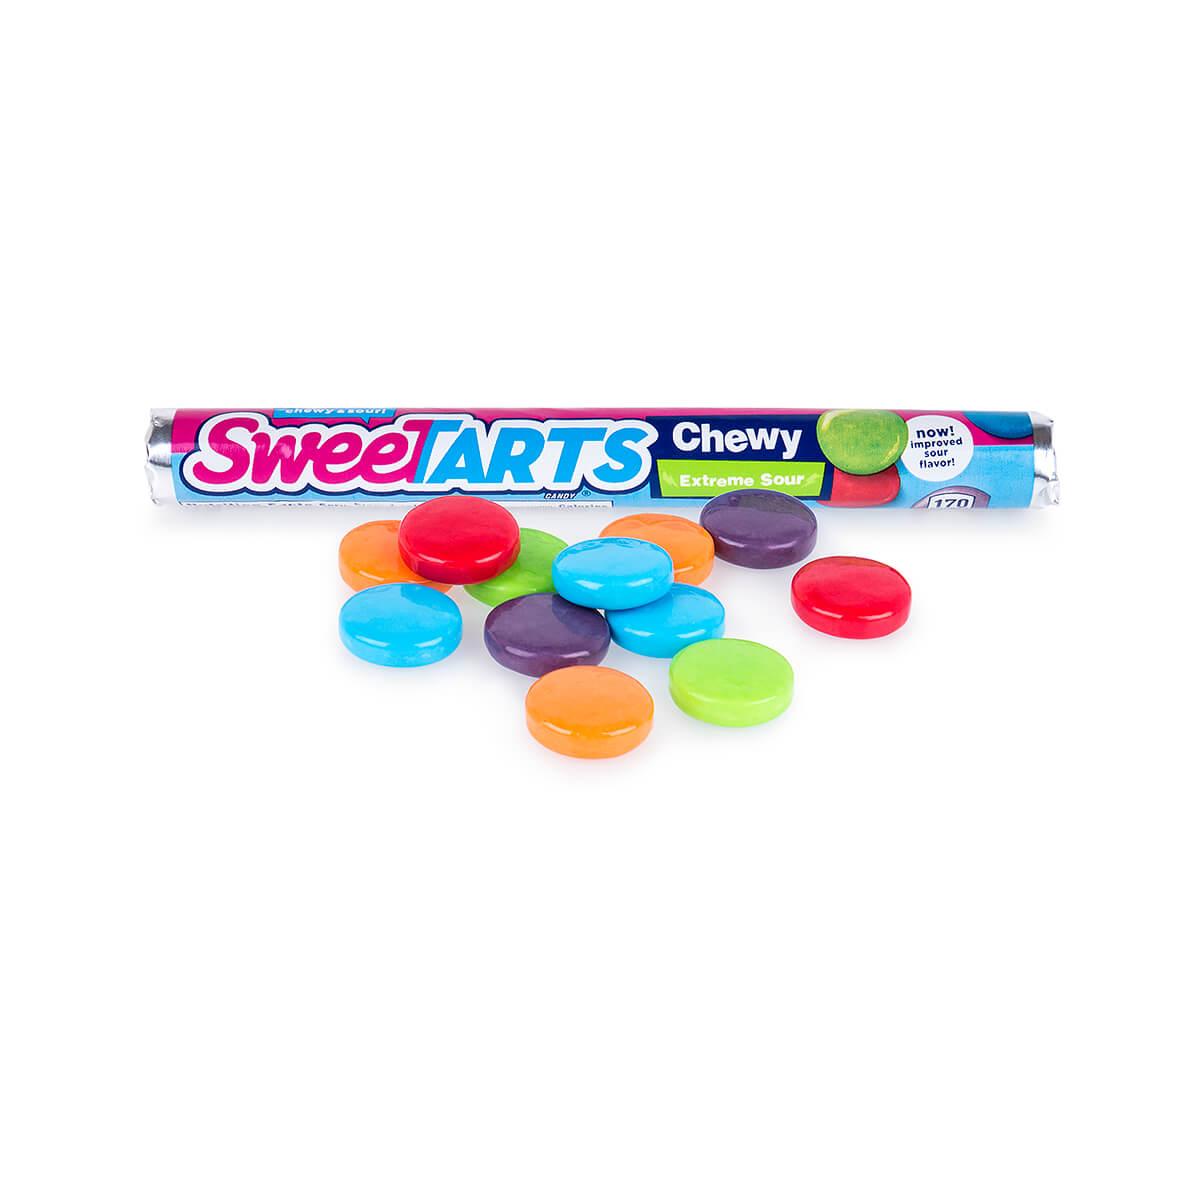  Sweetarts Chewy Extreme Sour Candy